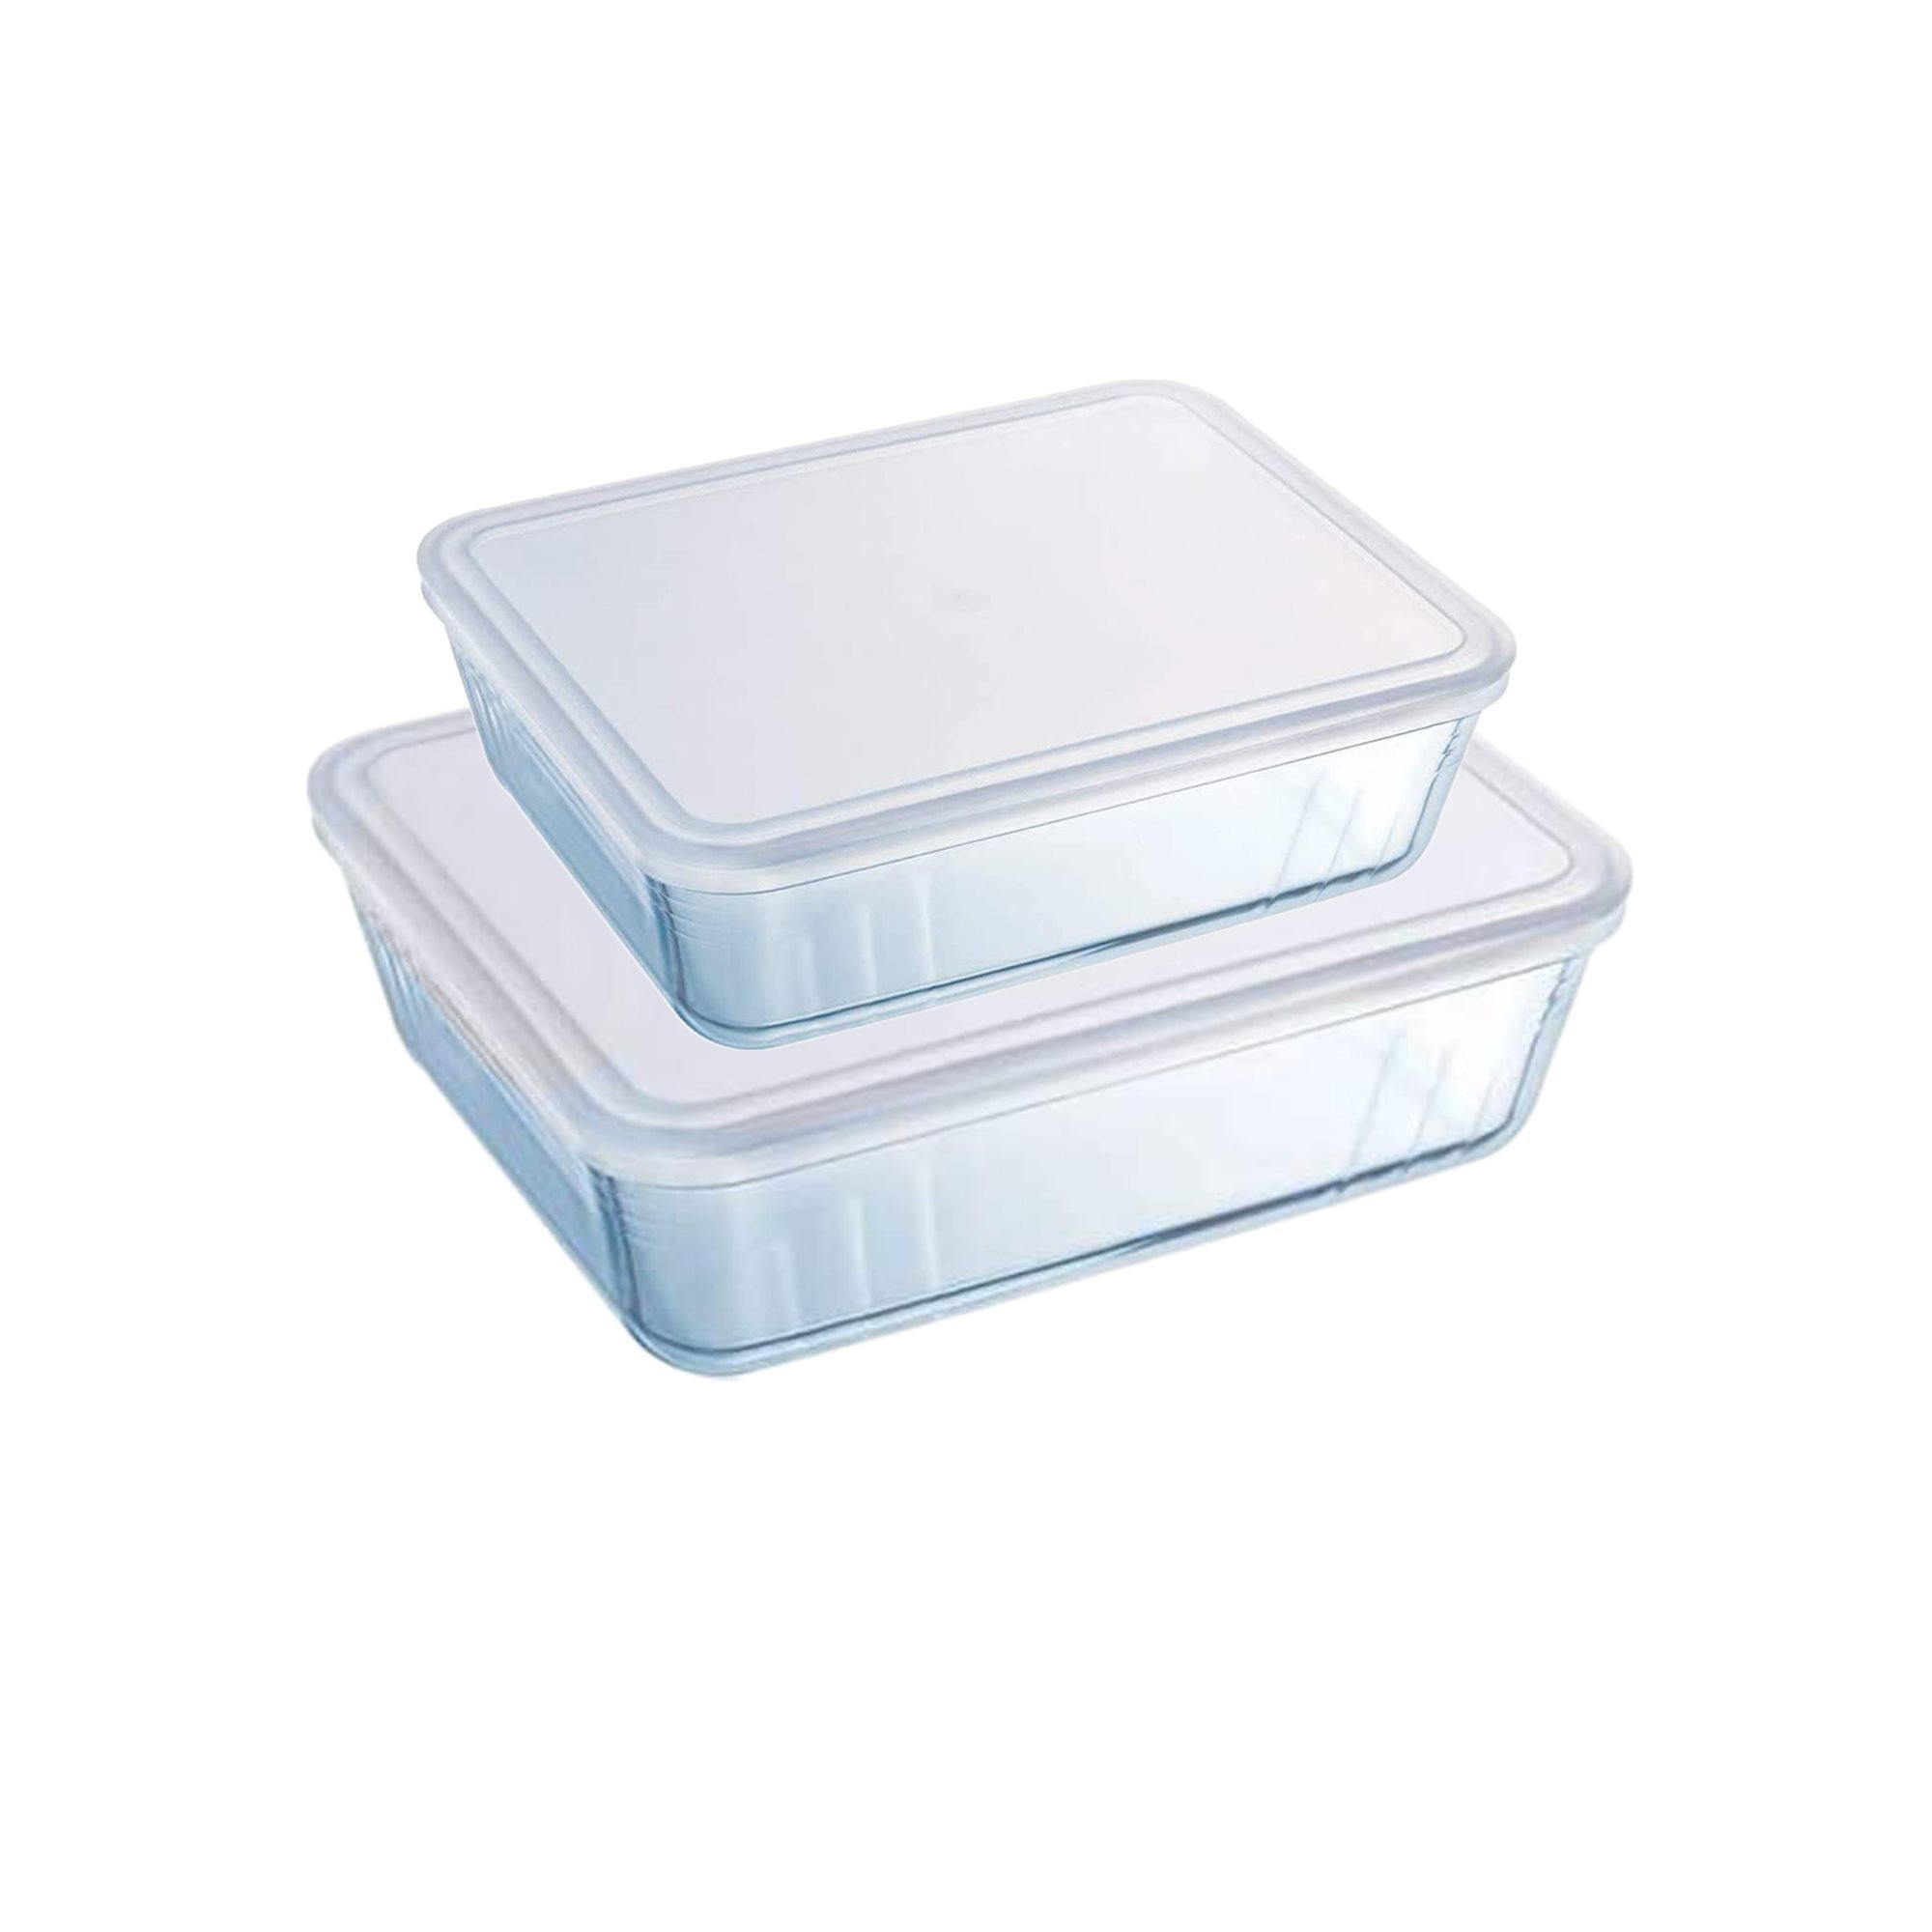 Set of 2 rectangular food containers, with lids, made of Cook & Freeze  heat-resistant glass, 1.5L / 2.6 L - Pyrex